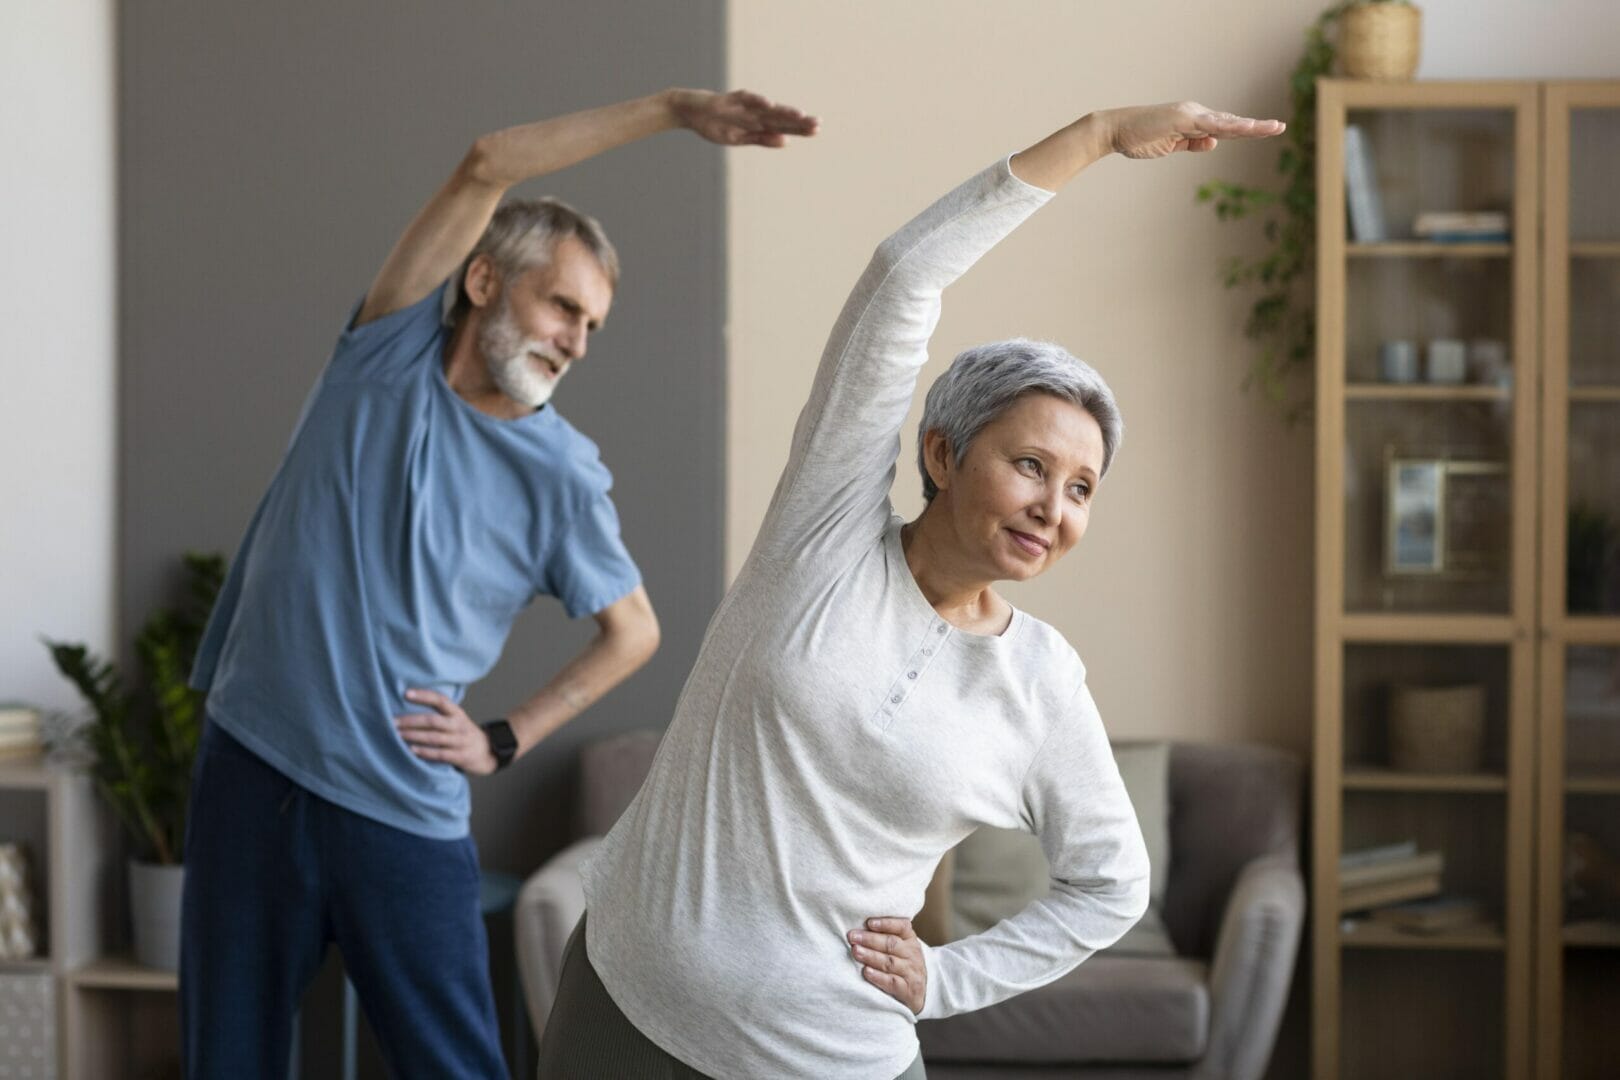 Top 10 Elderly Balance Exercises To Improve Balance And Coordination 